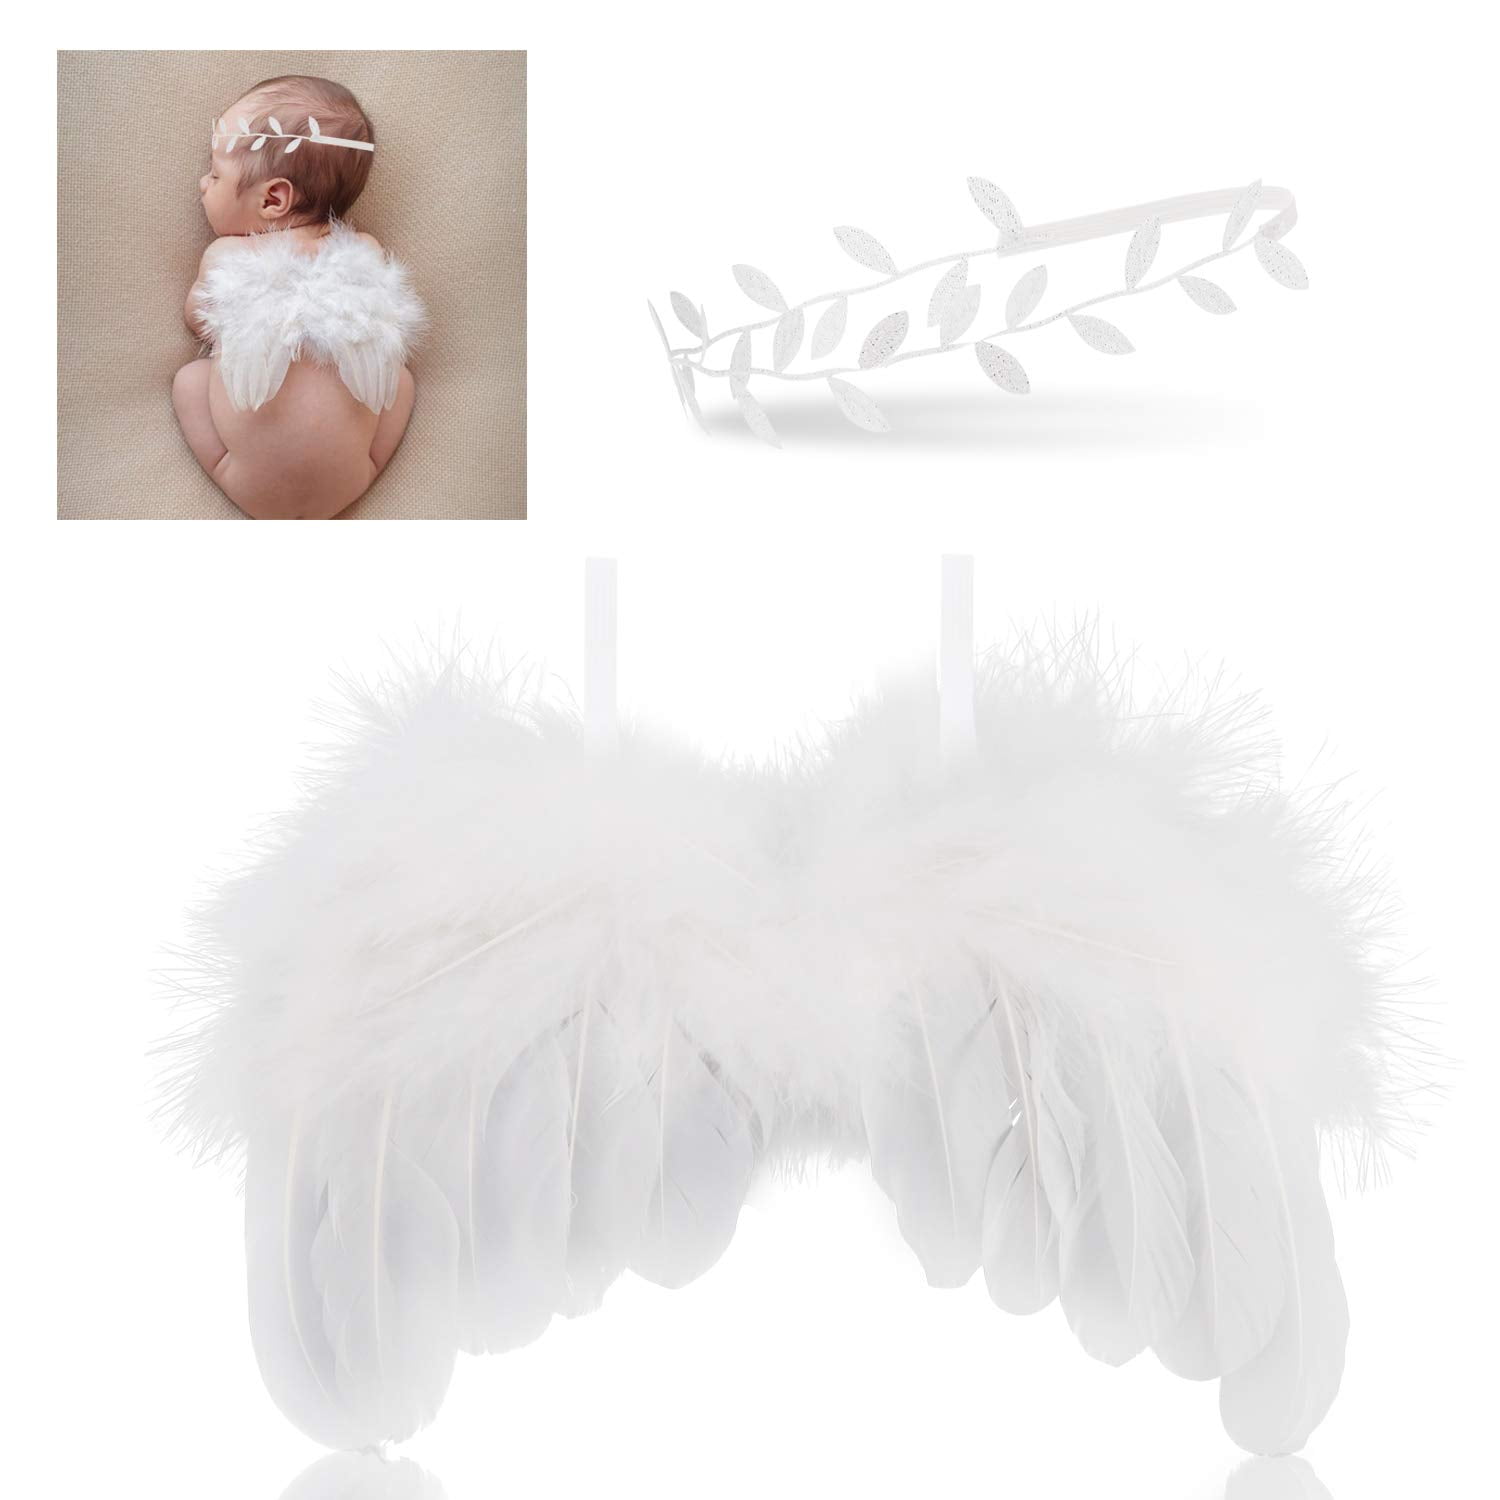 Newborn Baby White Angel Wings Headband Costume Photography Props Outfits HOT 